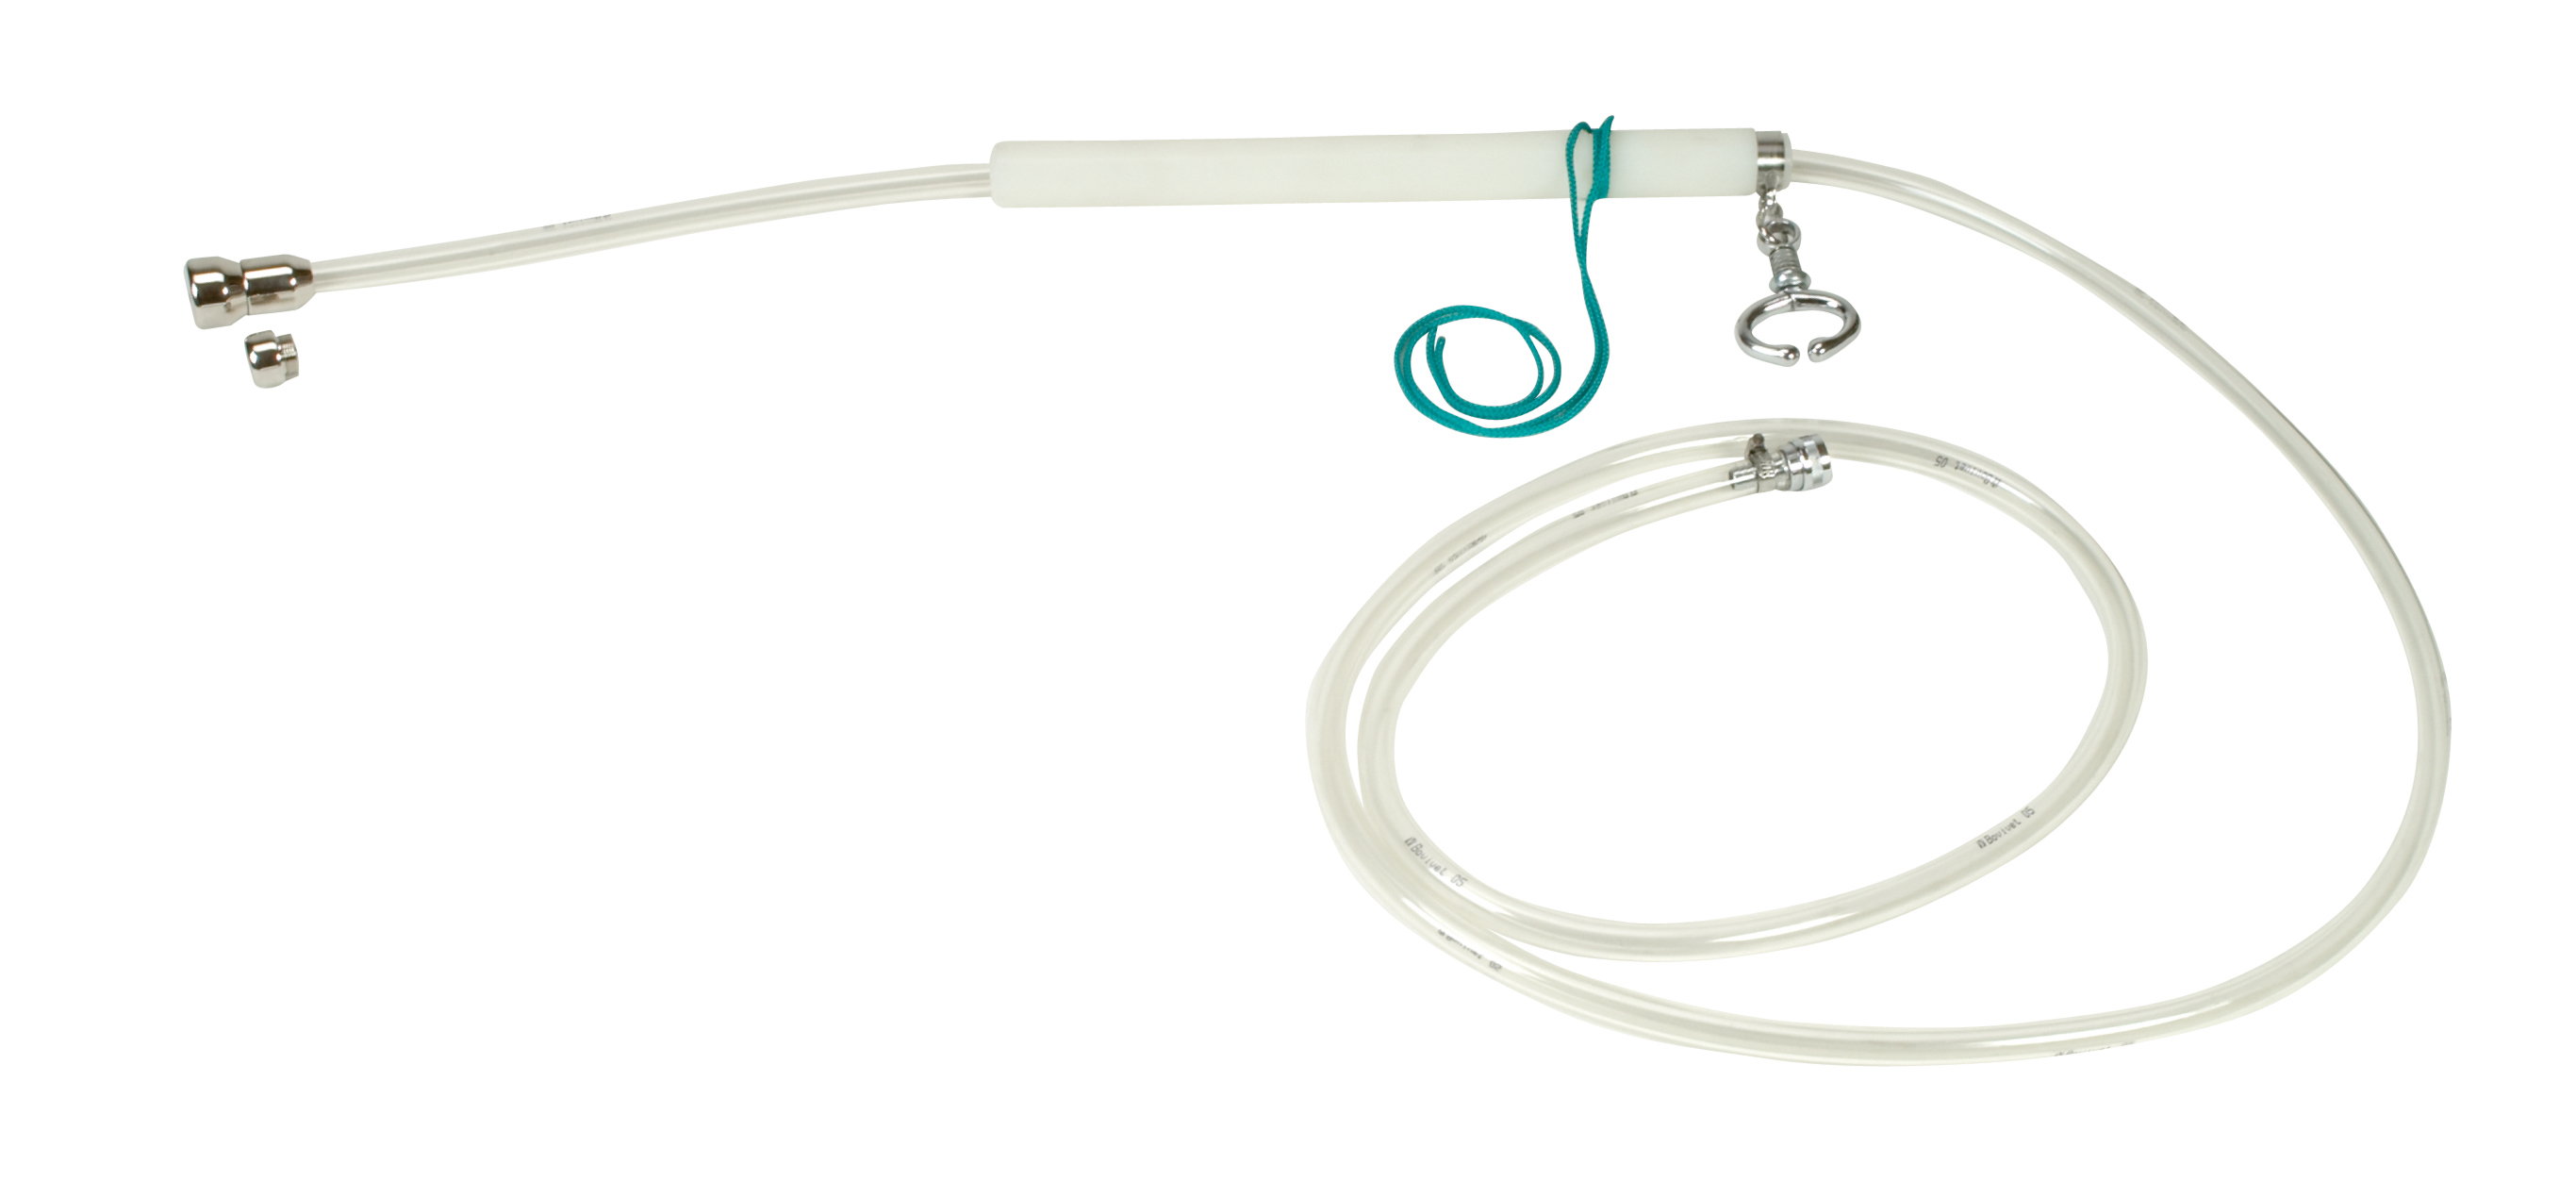 BOVIVET Stomach Probang System Mark II, excl. pump